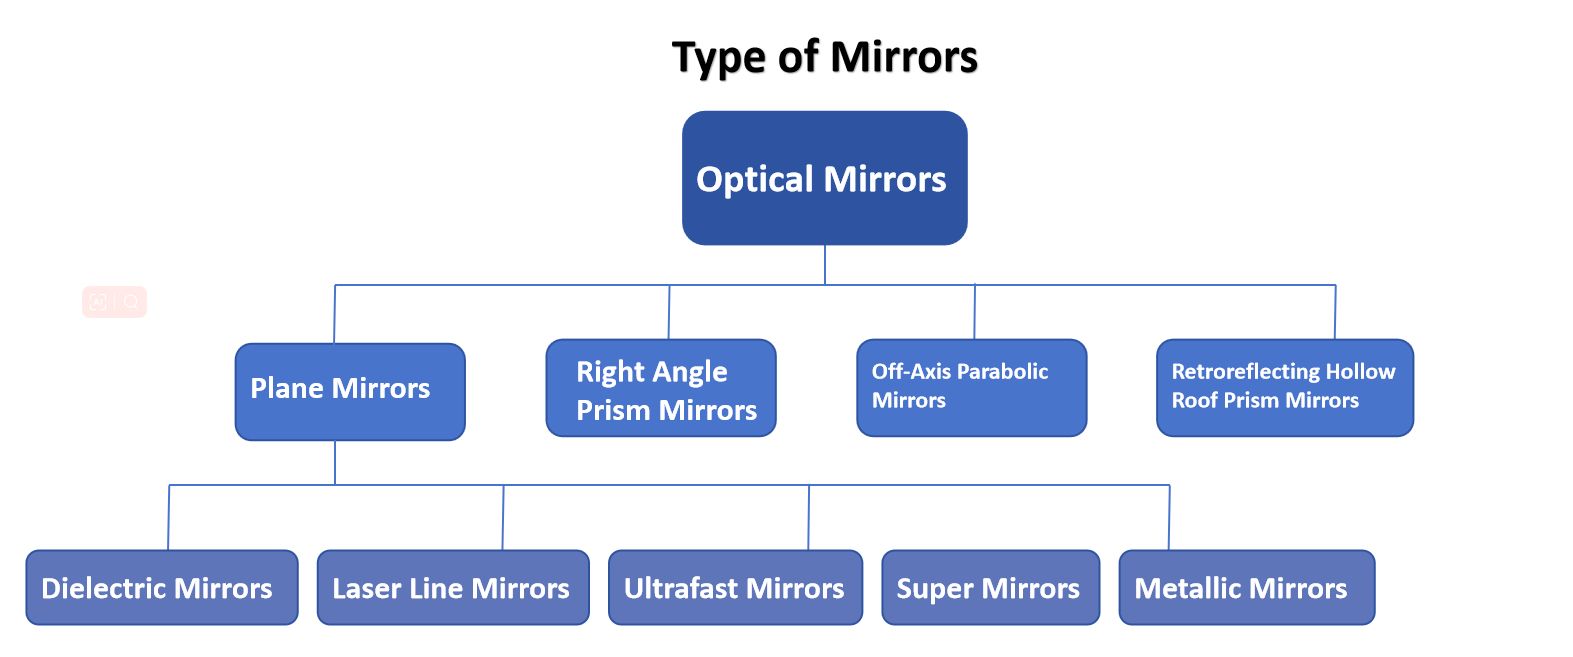 Types of Mirrors and Guide to 1